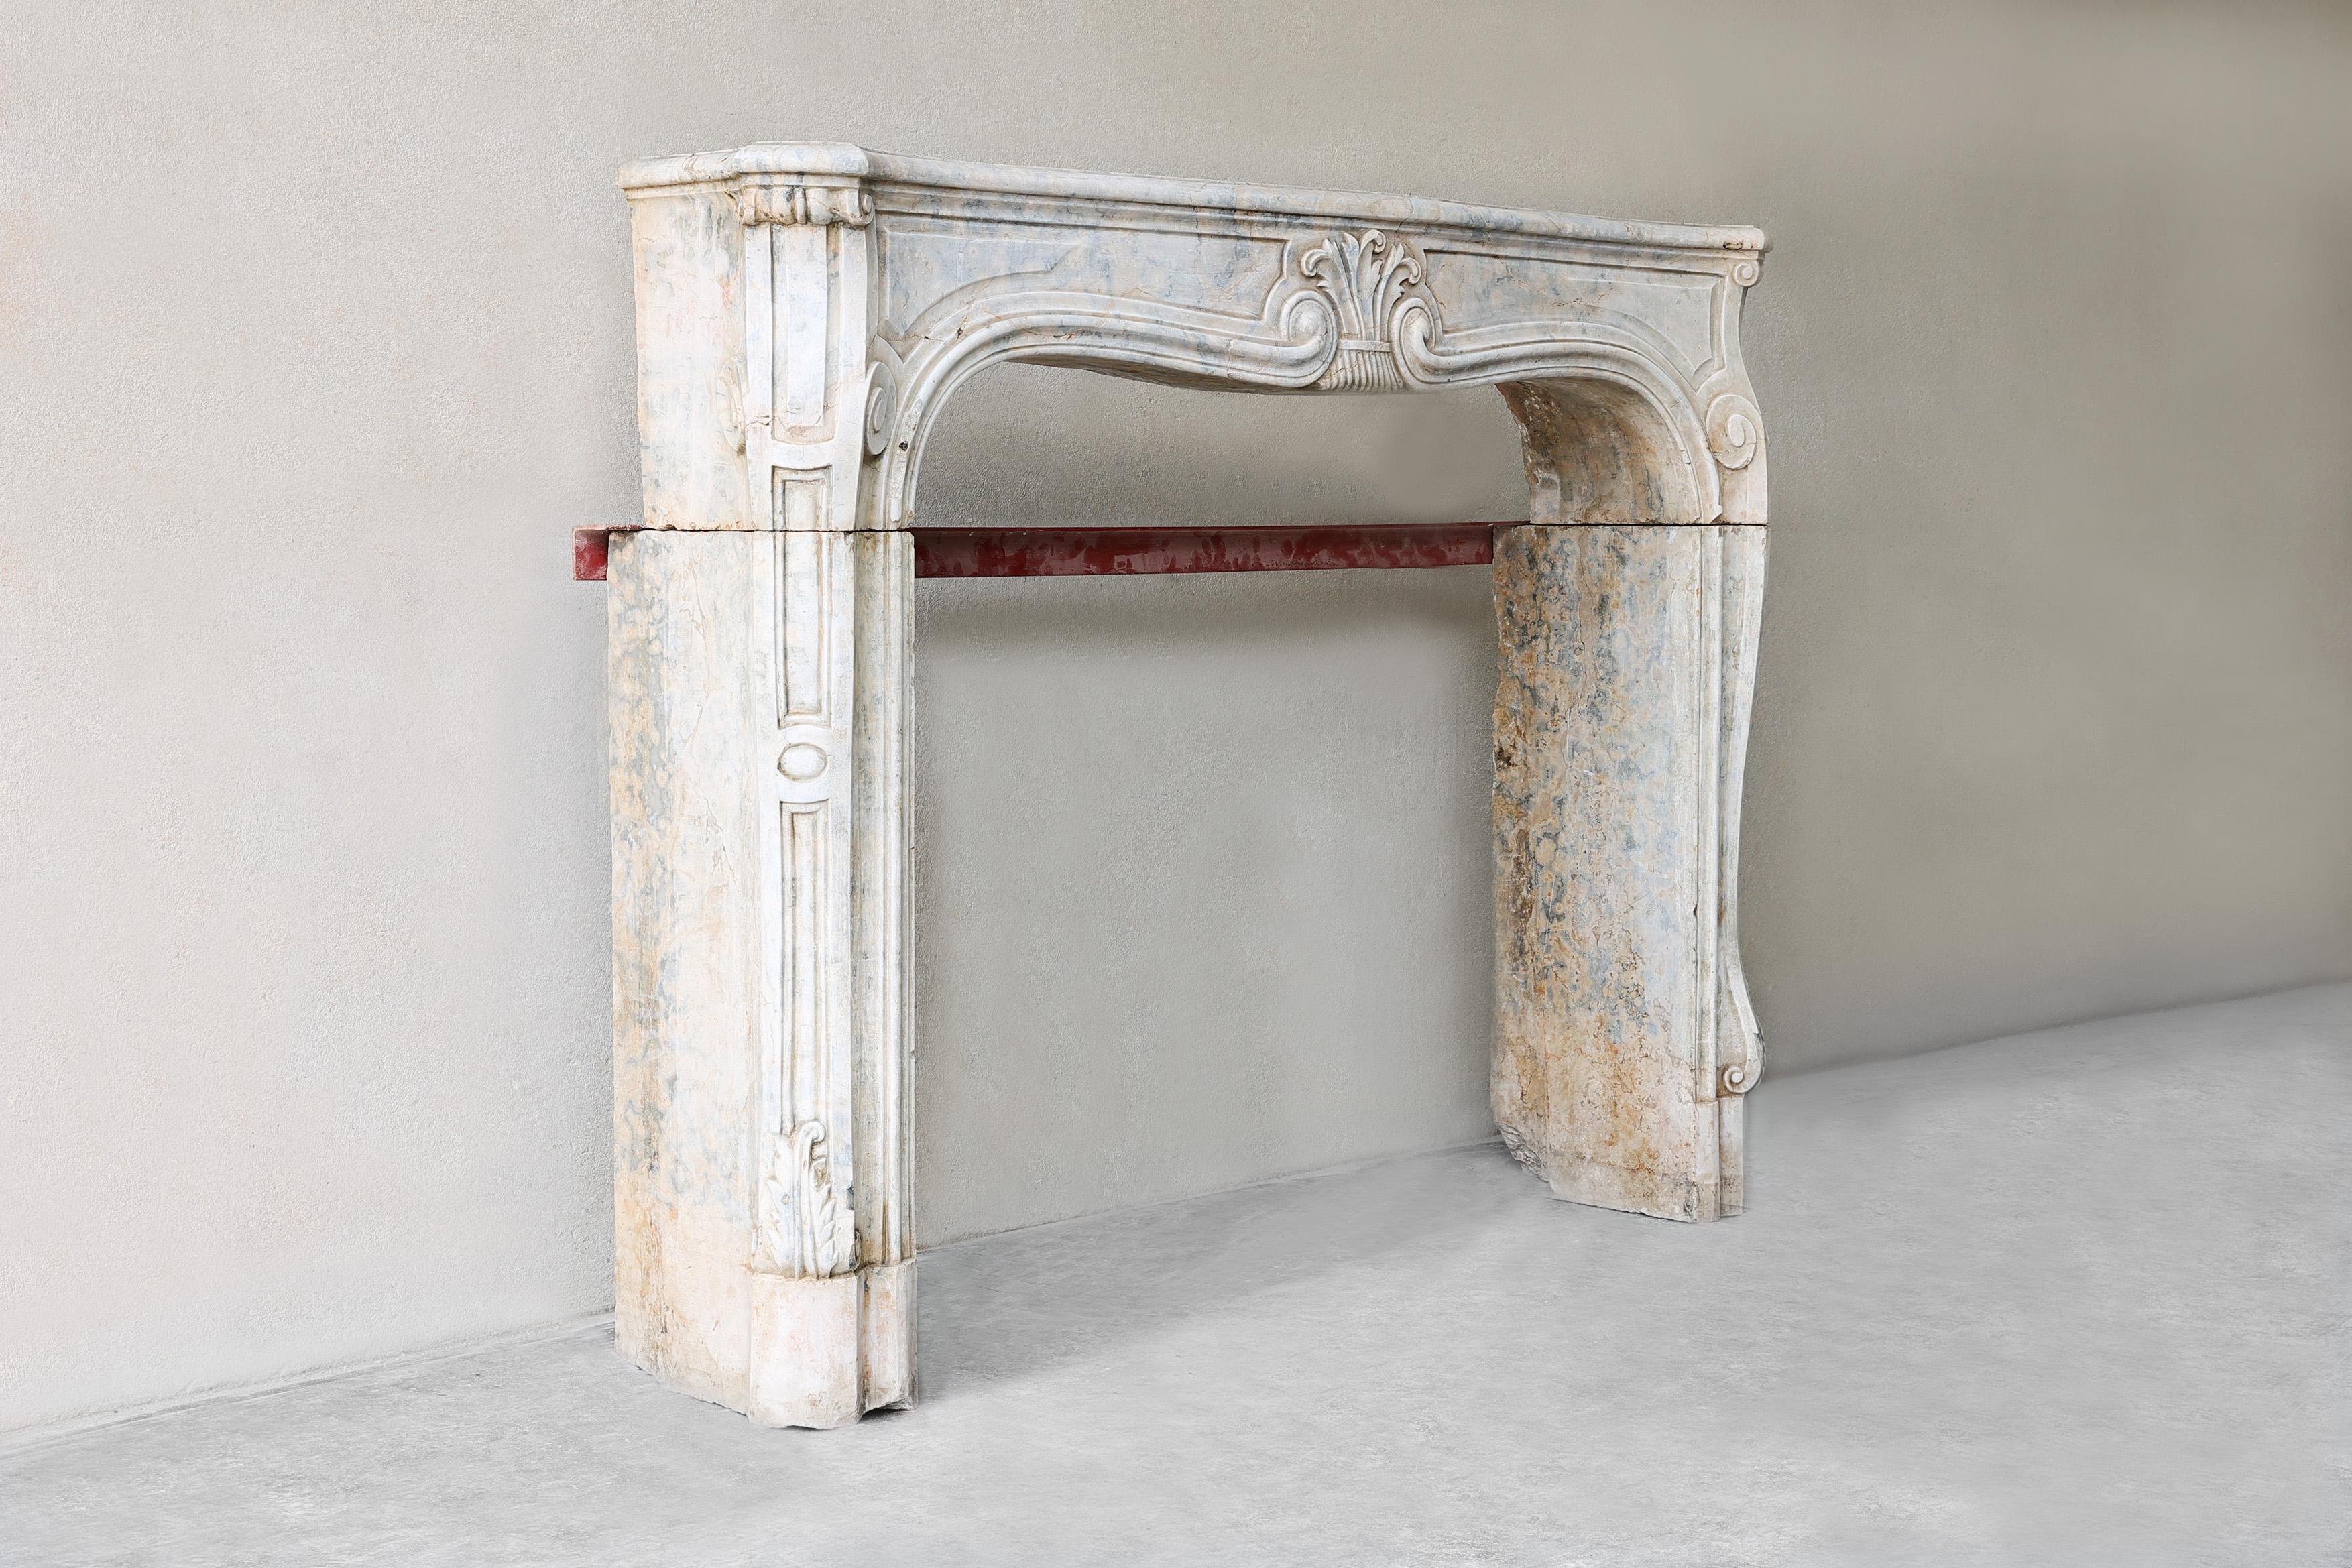 Beautiful antique mantelpiece made of Burgundian stone from the 19th century in the style of Louis XV. A very graceful mantelpiece with various ornaments and decorations. This mantelpiece has a warm appearance and compact size. A fireplace that fits